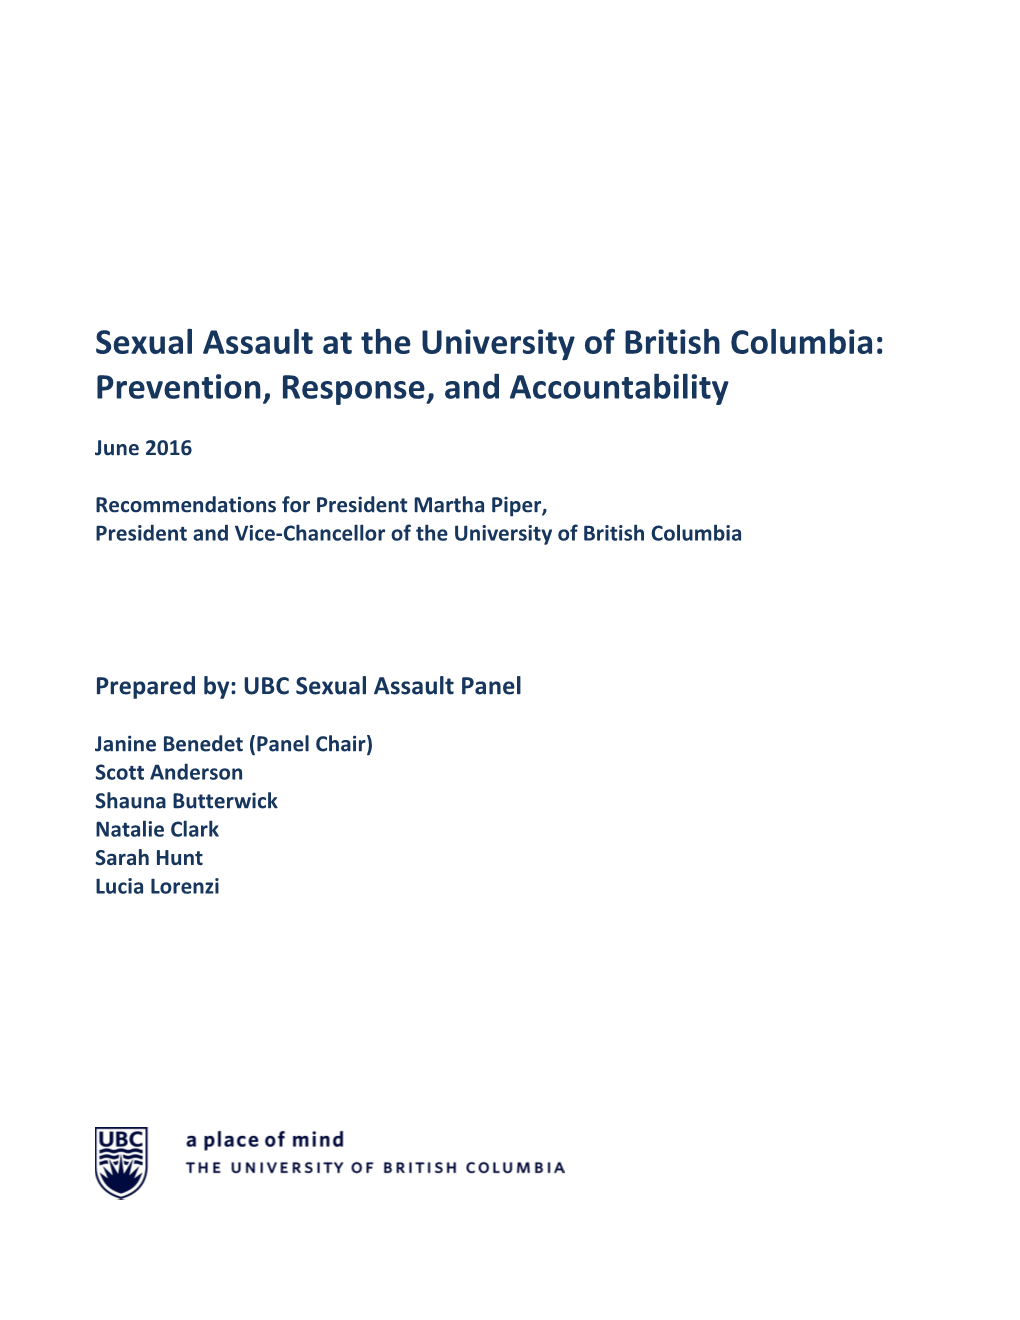 Sexual Assault at the University of British Columbia: Prevention, Response, and Accountability